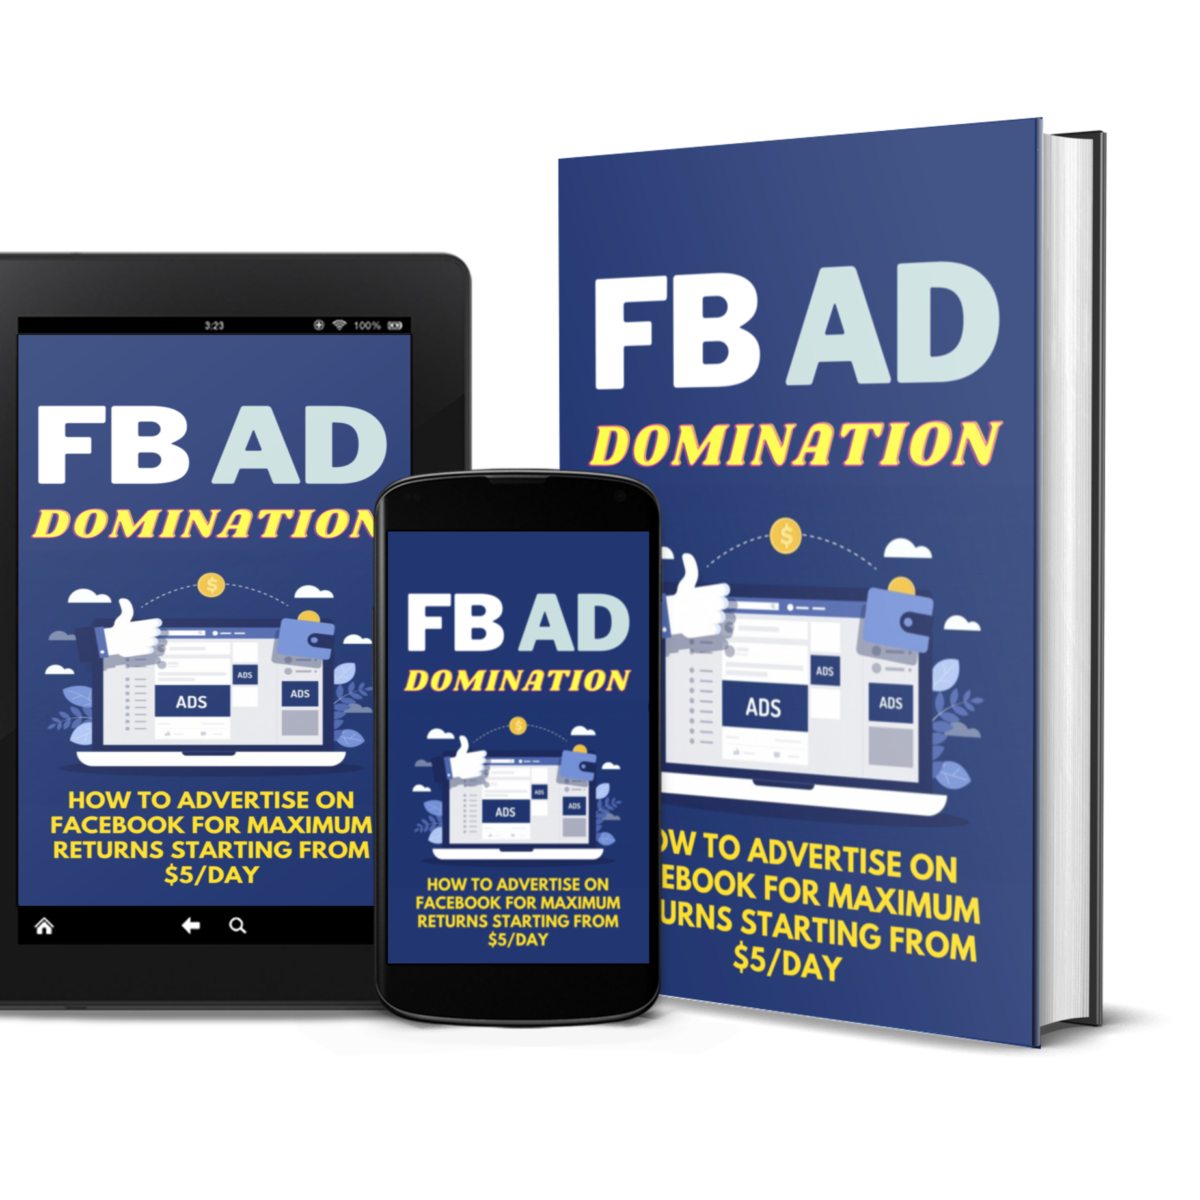 Facebook Ads Mastery